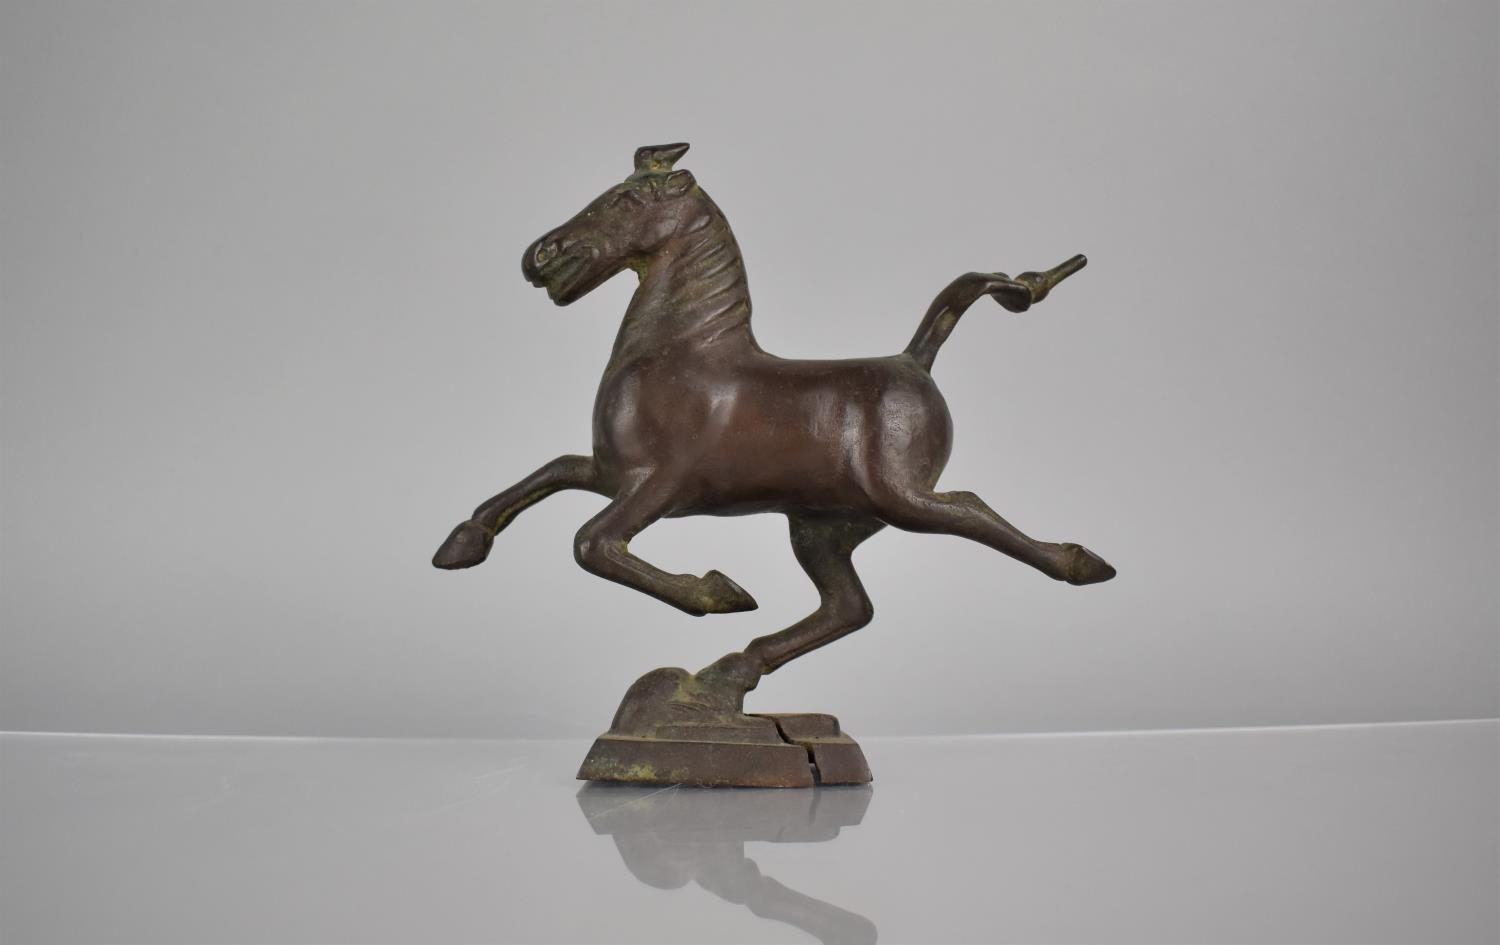 A Chinese Cast Bronze Study of The Flying Horse of Gansu, 18cms High. Condition: Not Perfect with